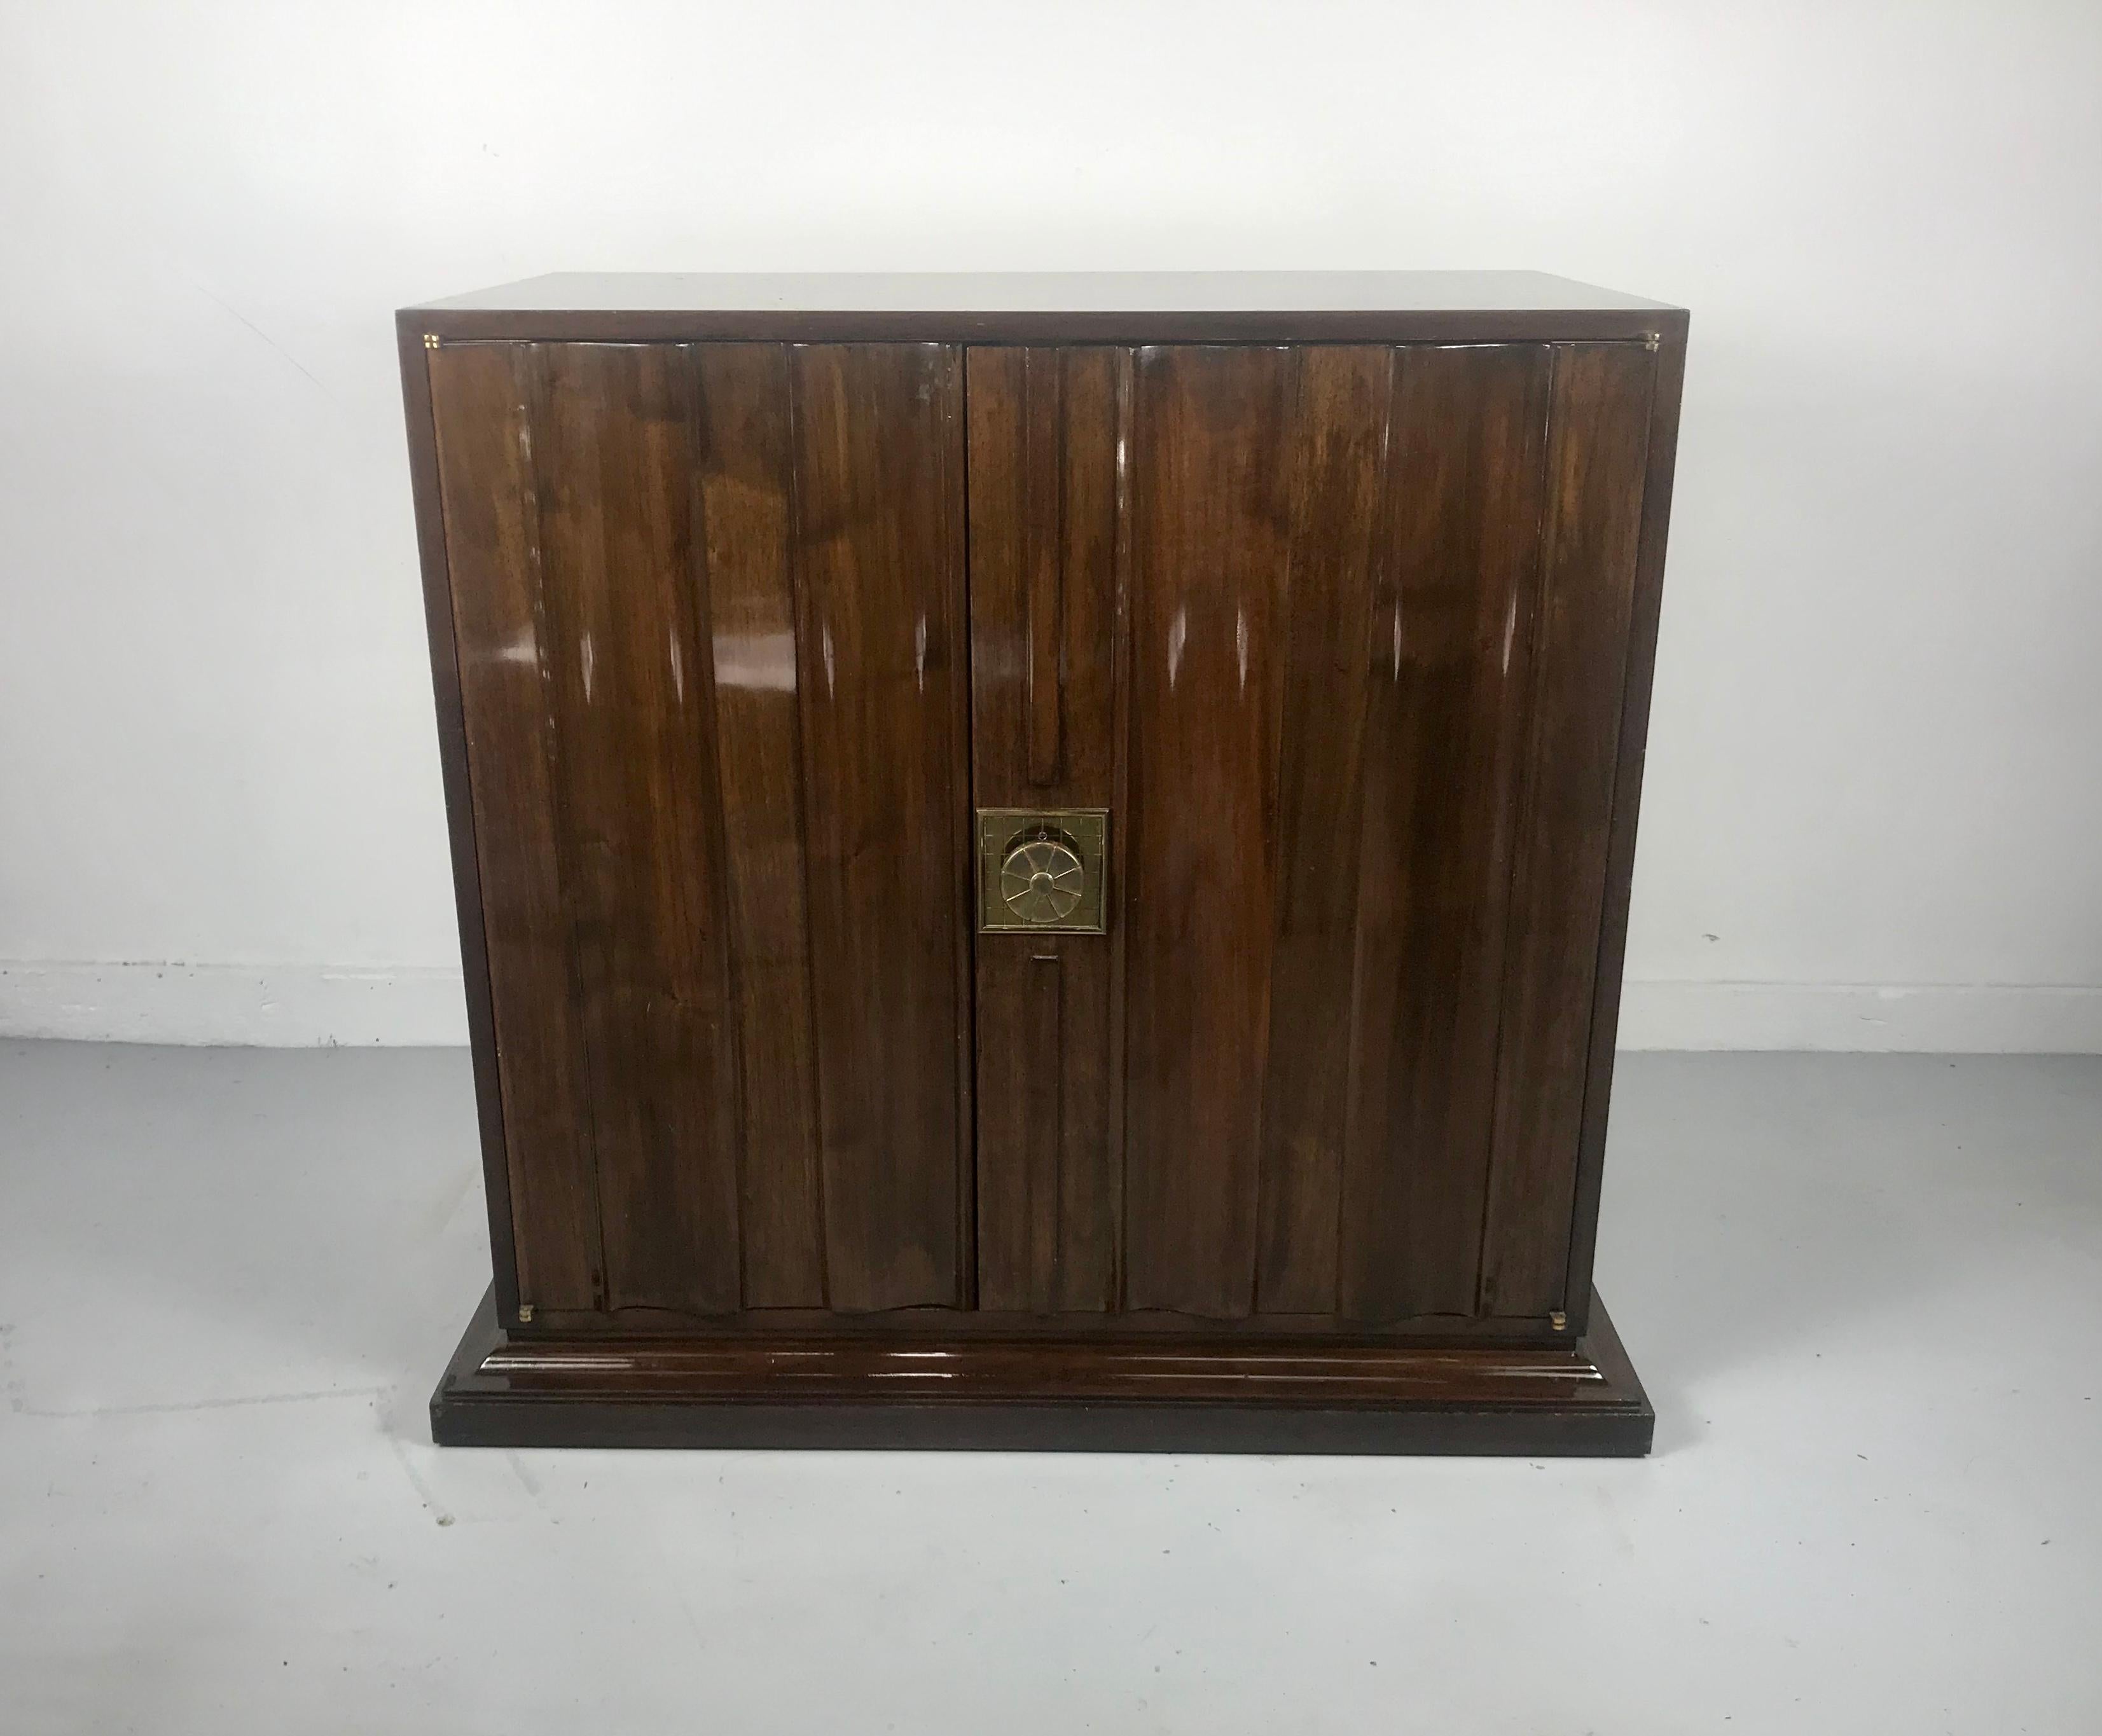 Beautiful two-door stunning fluted walnut cabinet by Tommi Parzinger with Classic cross-hatched brass escutcheons and pulls, with a stepped plinth three-sided base.Hand delivery avail to New York City or anywhere en route from Buffalo NY.